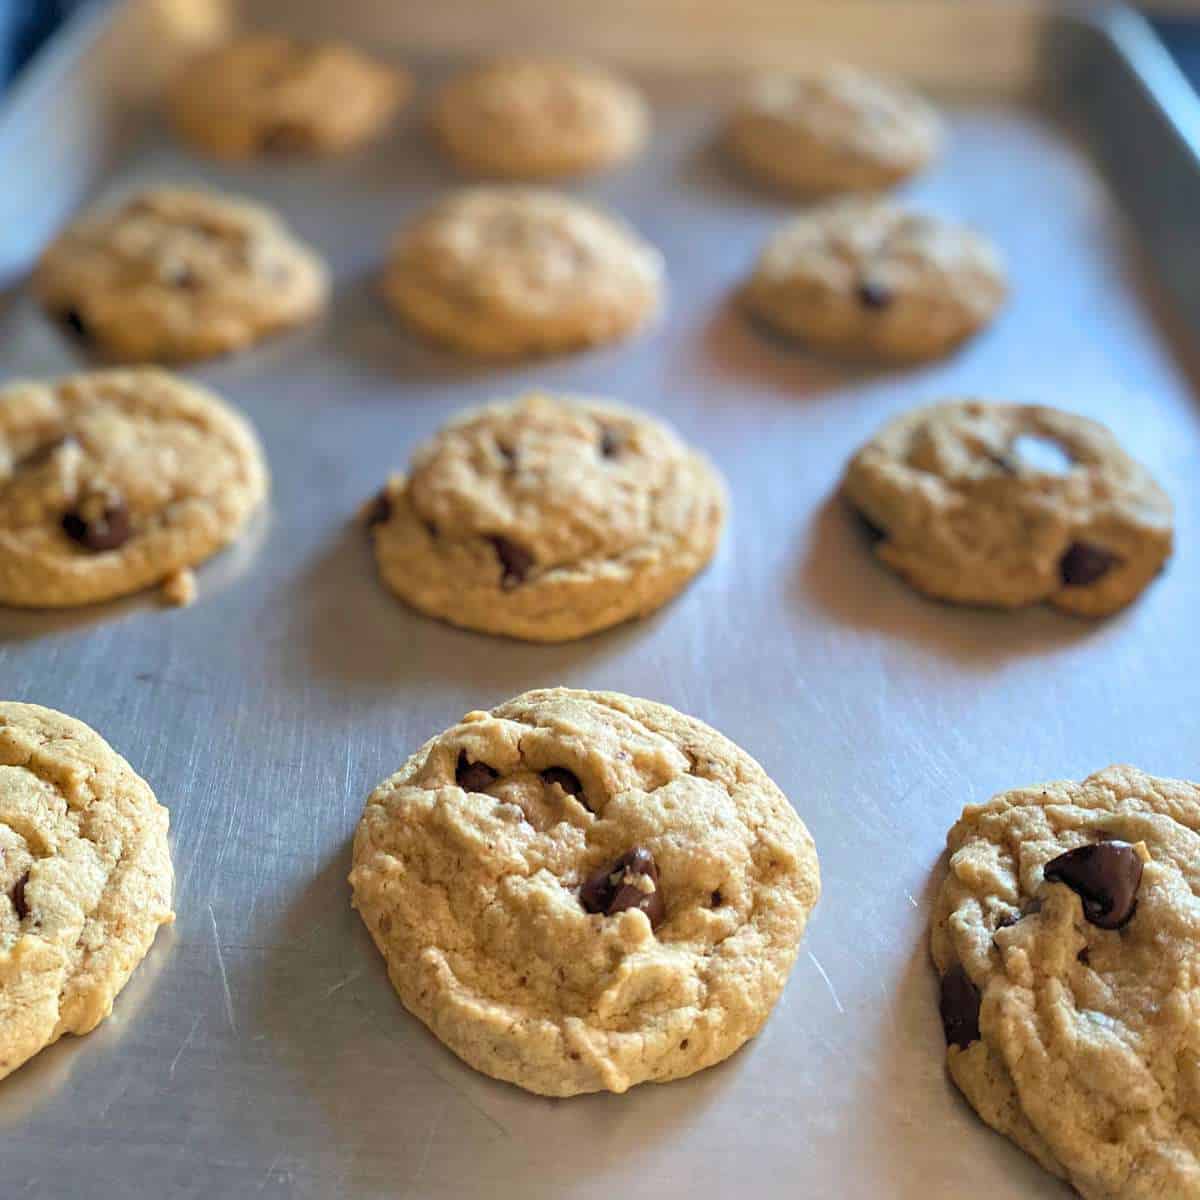 Baked gluten free, dairy free, egg free chocolate chip cookies on a cookie sheet.